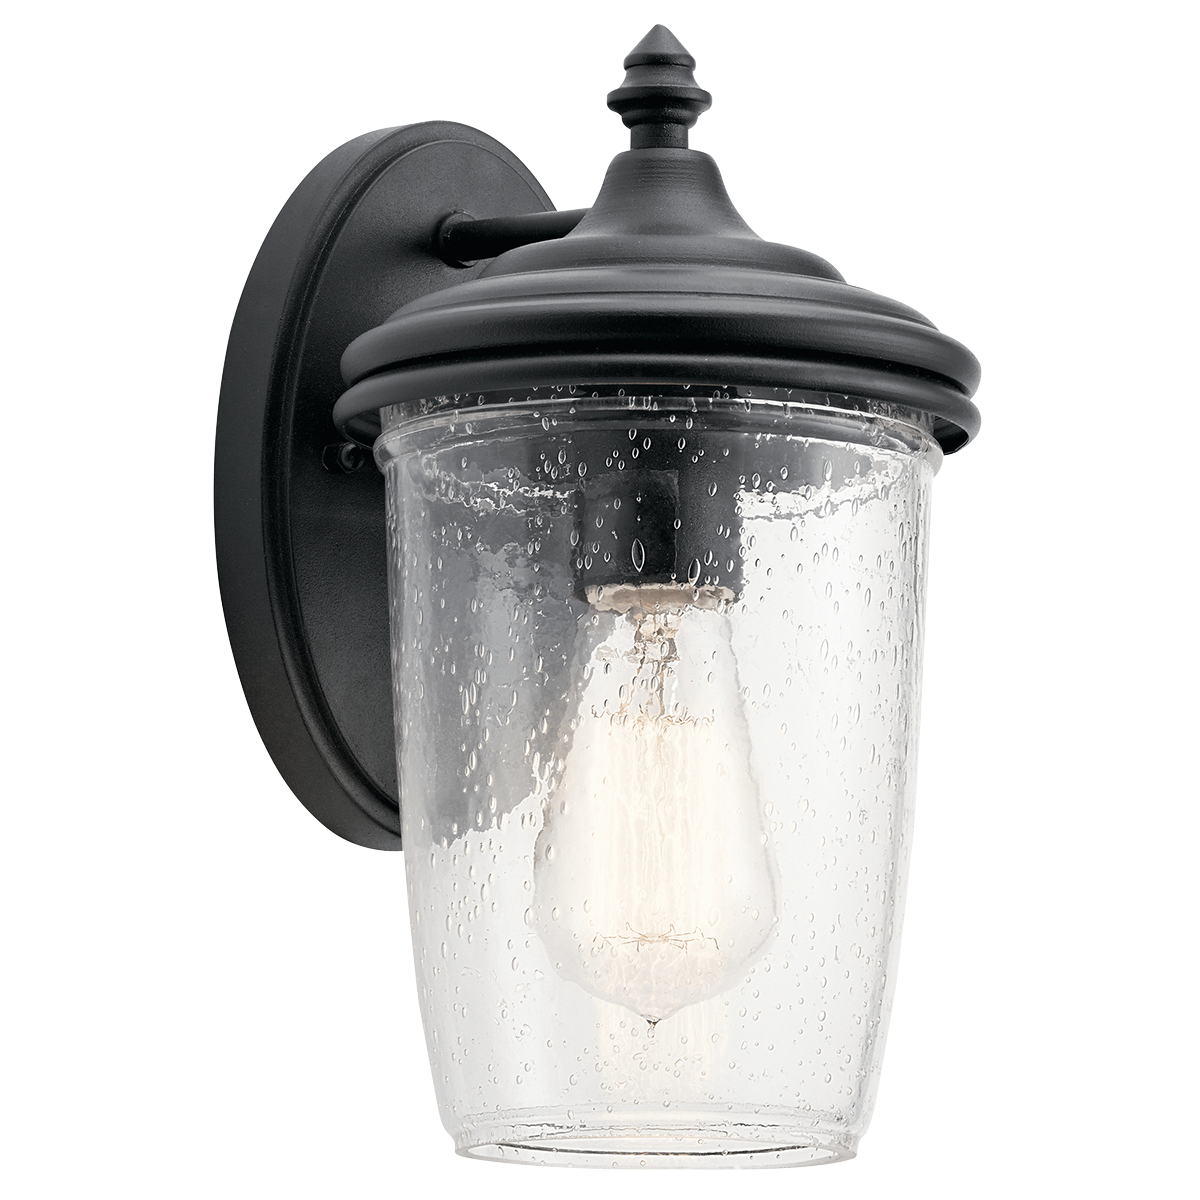 Vintage canning jars are the inspiration behind this Yorke collection 10.5in. 1 light outdoor wall lantern's distinguished look. It brings together simplicity and reclaimed style in one, with a Textured Black finish and clear seeded glass.